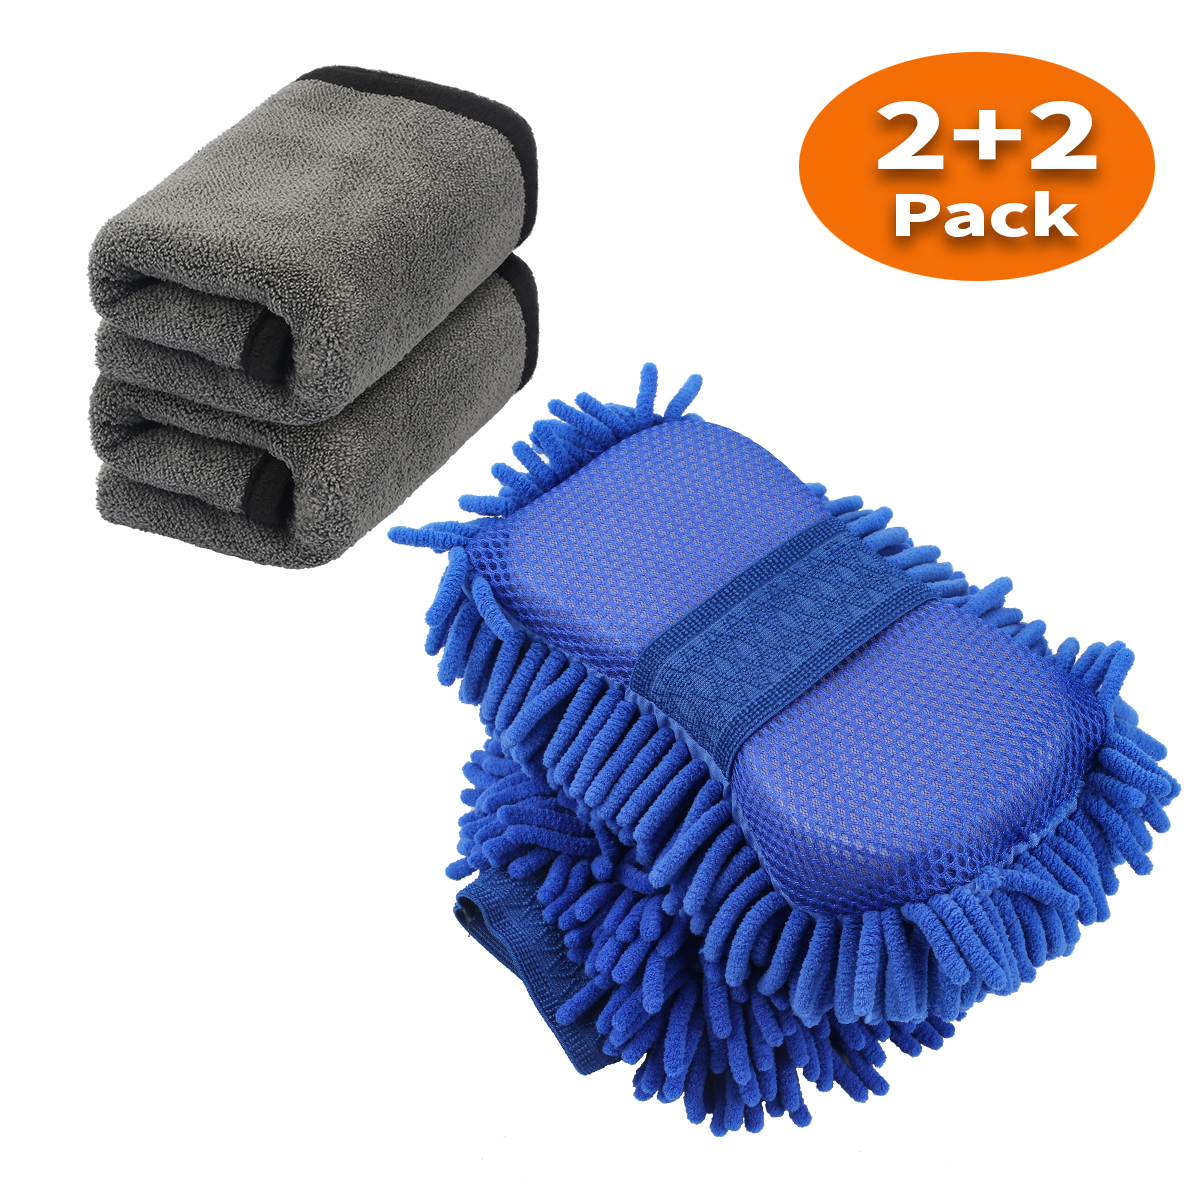 AUTODECO 3in1 Car Wash Mitt Extra Large Size Premium Chenille Microfiber Waterproof Wash Glove with Highly Absorbent Drying Cleaning Towel Lint Free Scratch Free Cleaning Tool Kit 2 Mitt & 1 Towel 